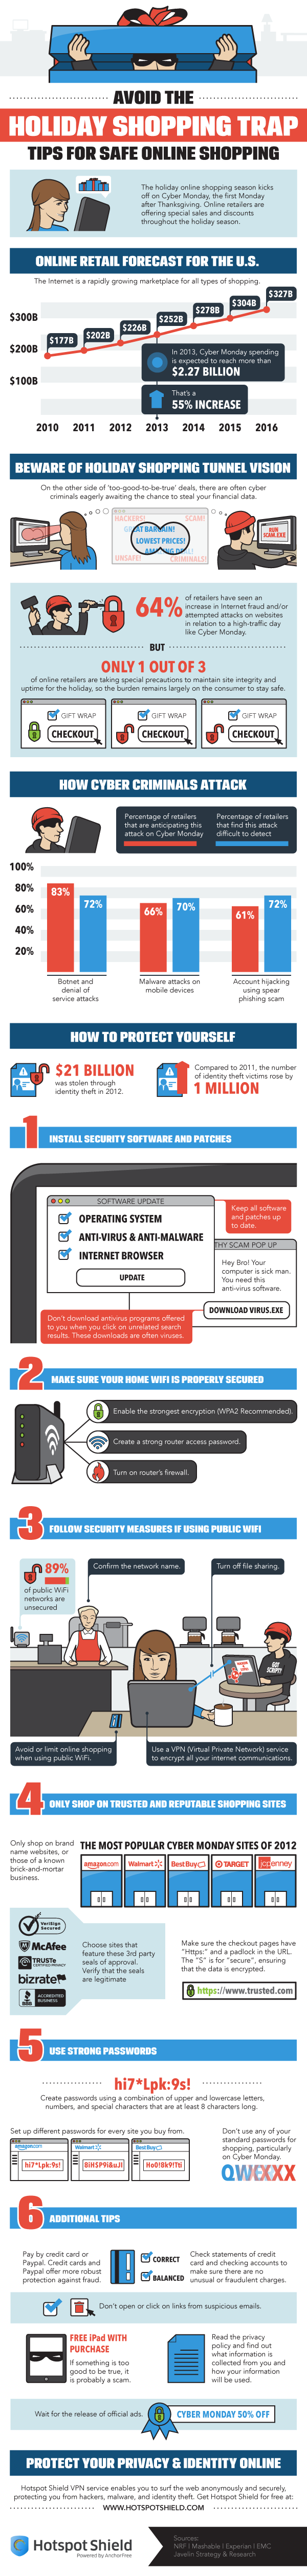 safe online shopping tips infographic